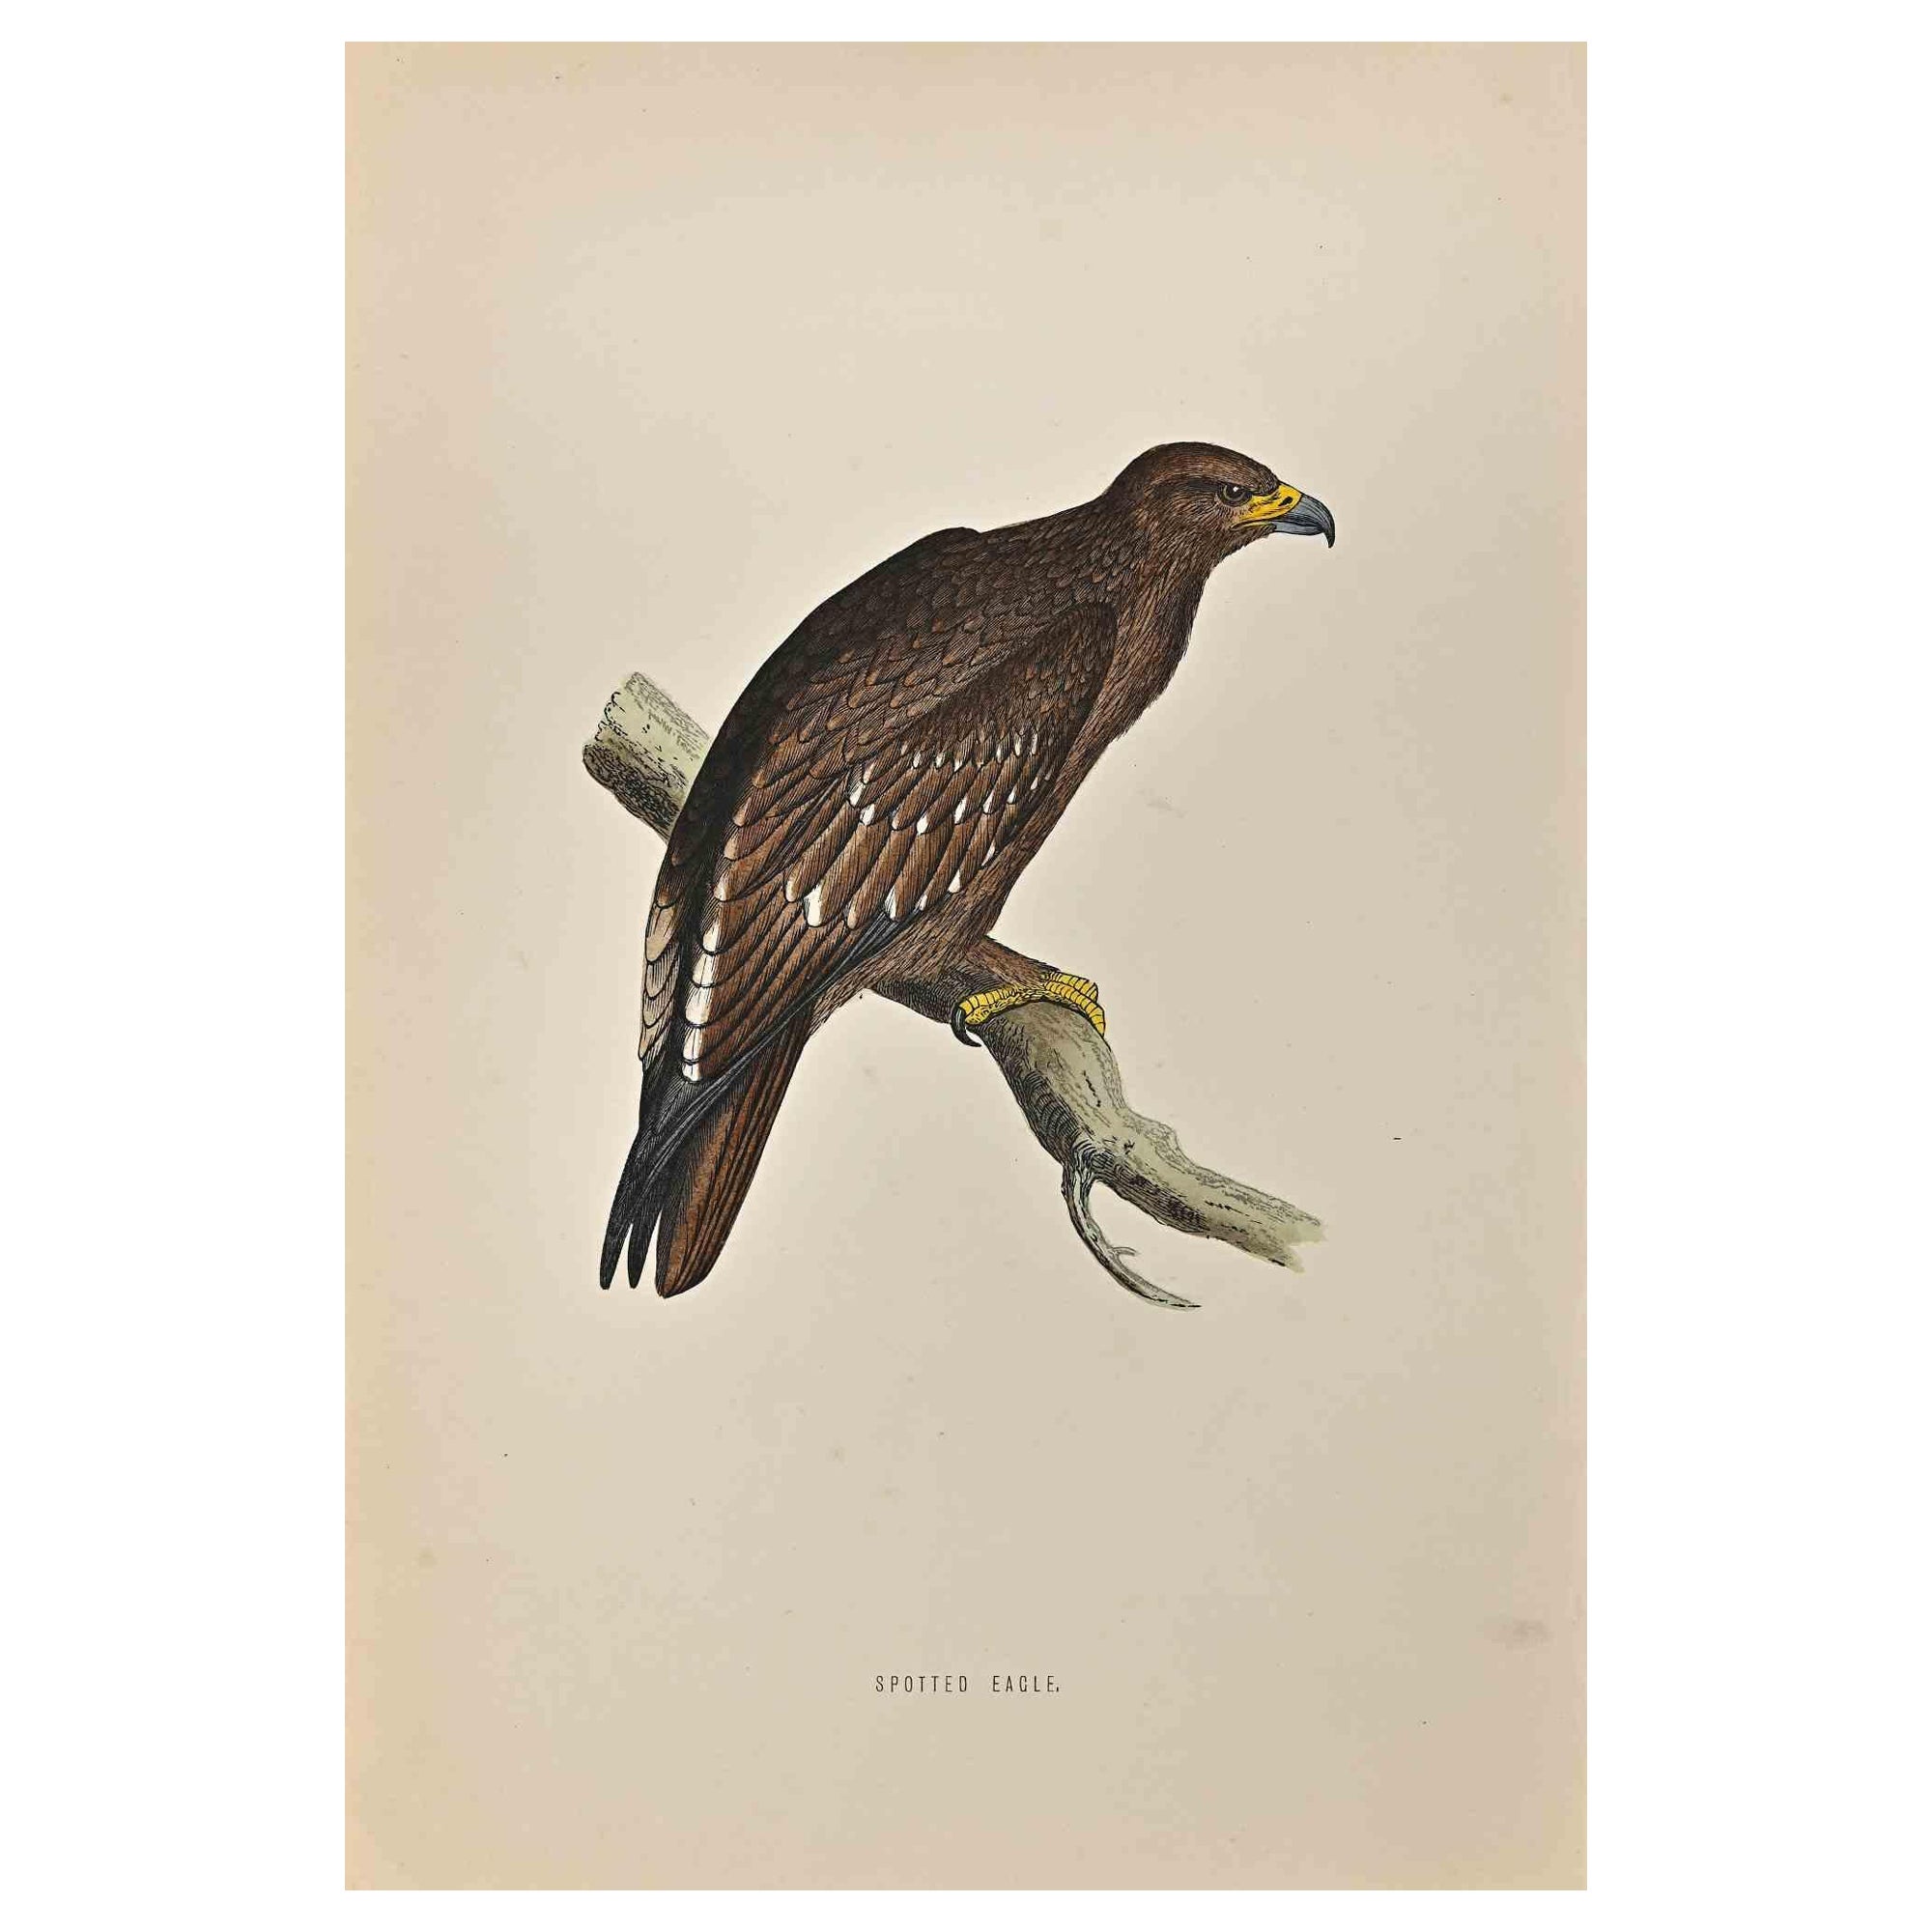 Spotted Eagle is a modern artwork realized in 1870 by the British artist Alexander Francis Lydon (1836-1917) . 

Woodcut print, hand colored, published by London, Bell & Sons, 1870.  Name of the bird printed in plate. This work is part of a print